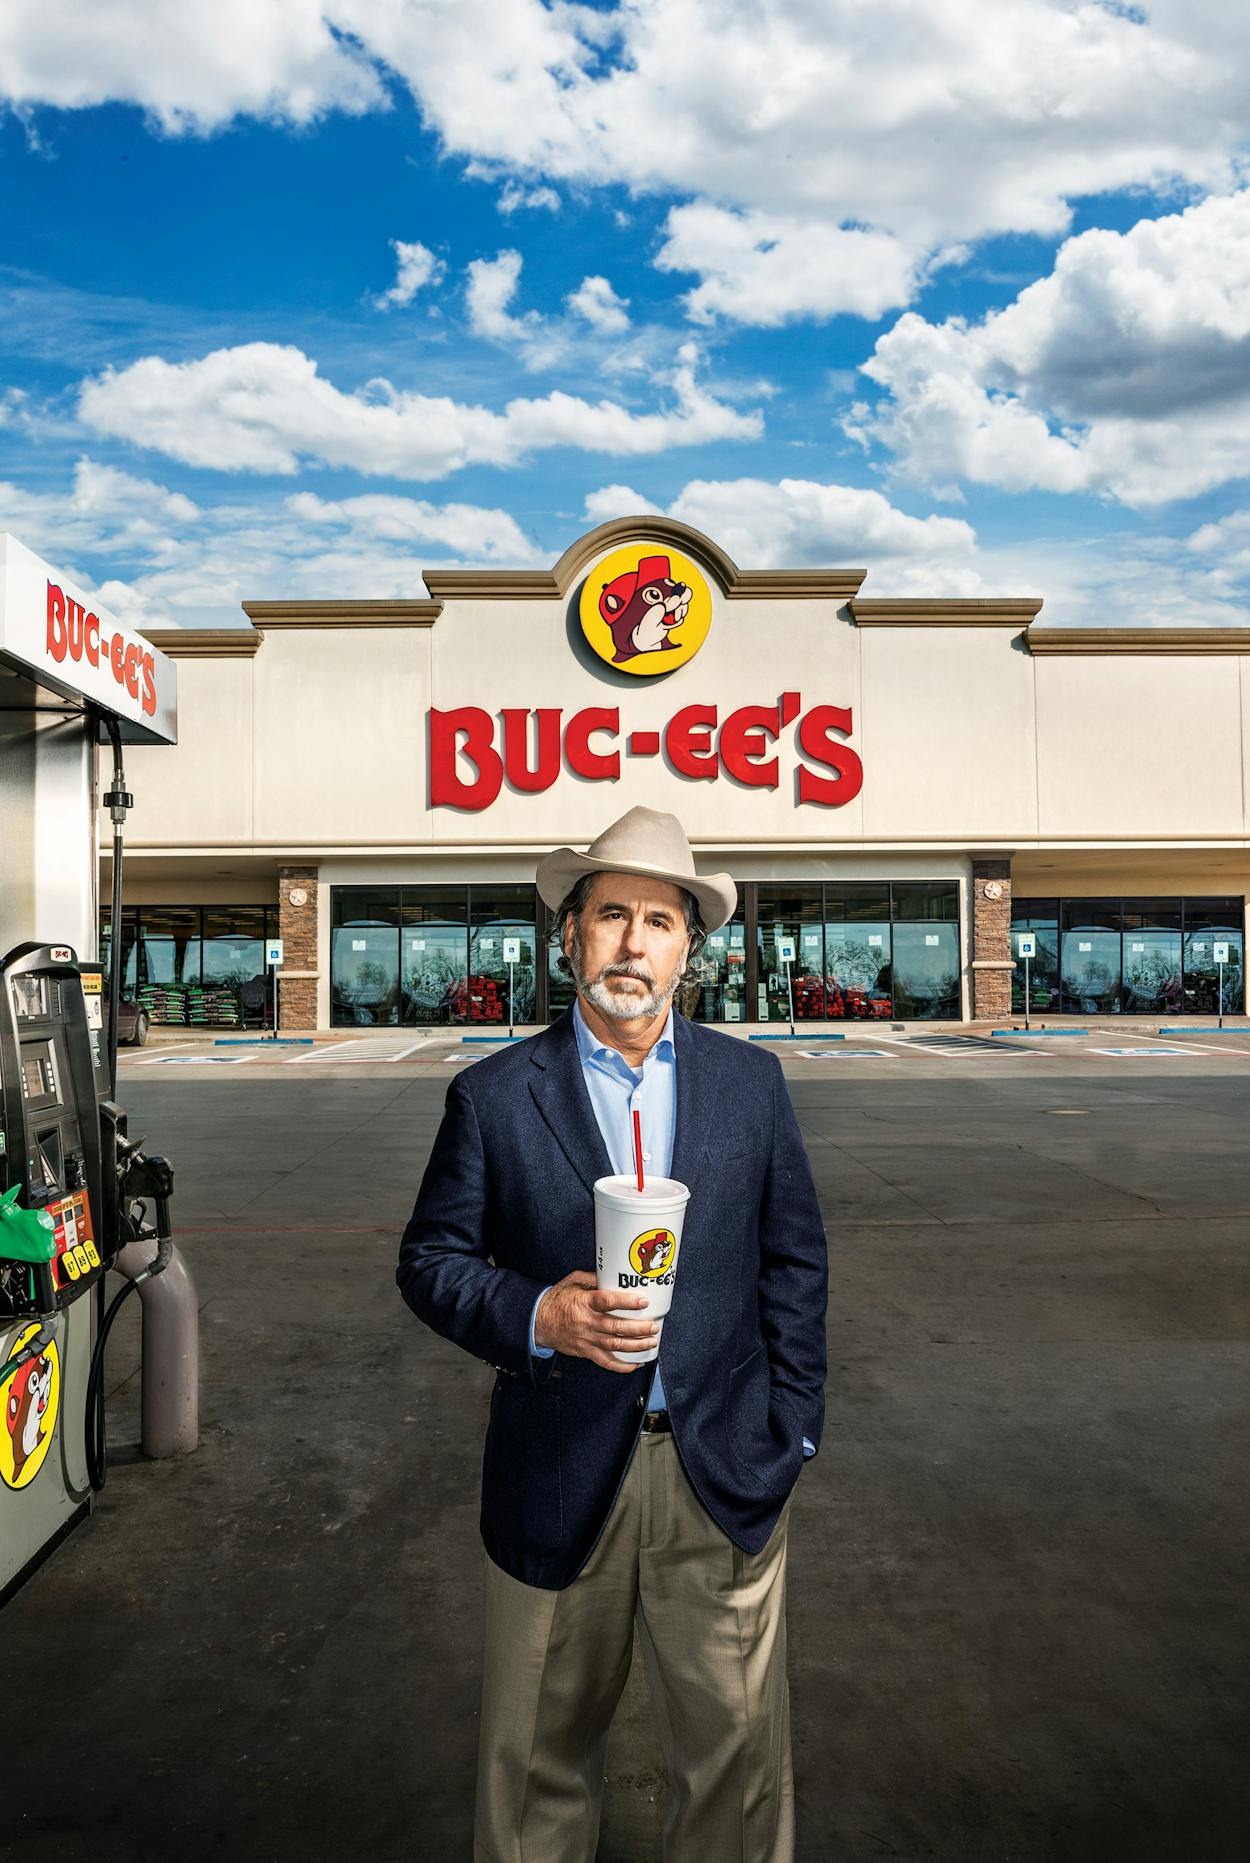 https://img.texasmonthly.com/2019/02/bucees-march-01_2.jpg?auto=compress&crop=faces&fit=fit&fm=jpg&h=0&ixlib=php-3.3.1&q=45&w=1250